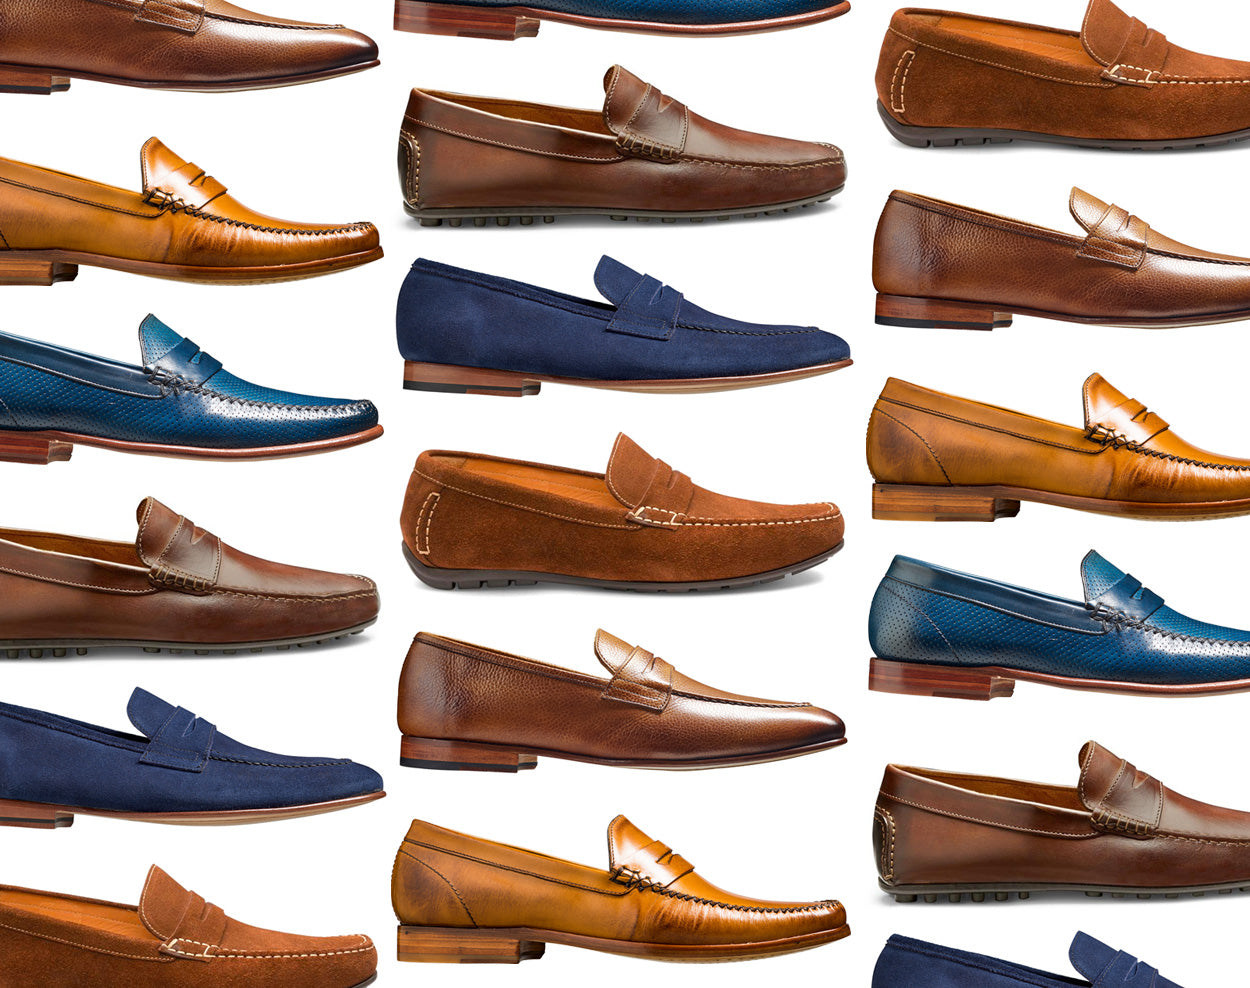 cheaney shoes discount code